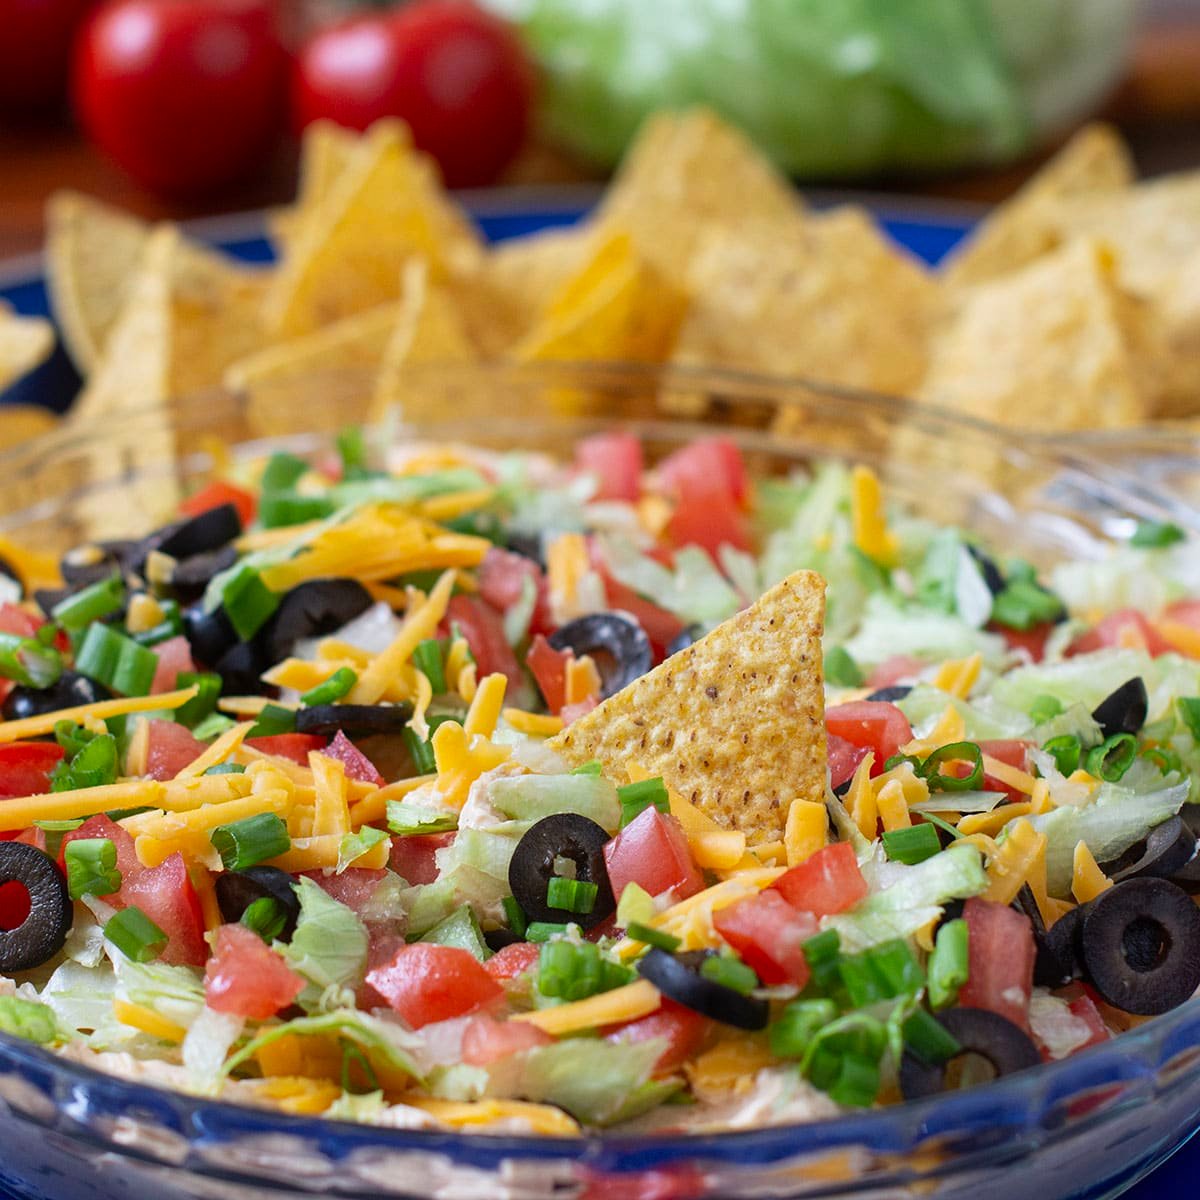 Classic Taco Dip with cheese, olives, lettuce, and tomato with tortilla chips in background.